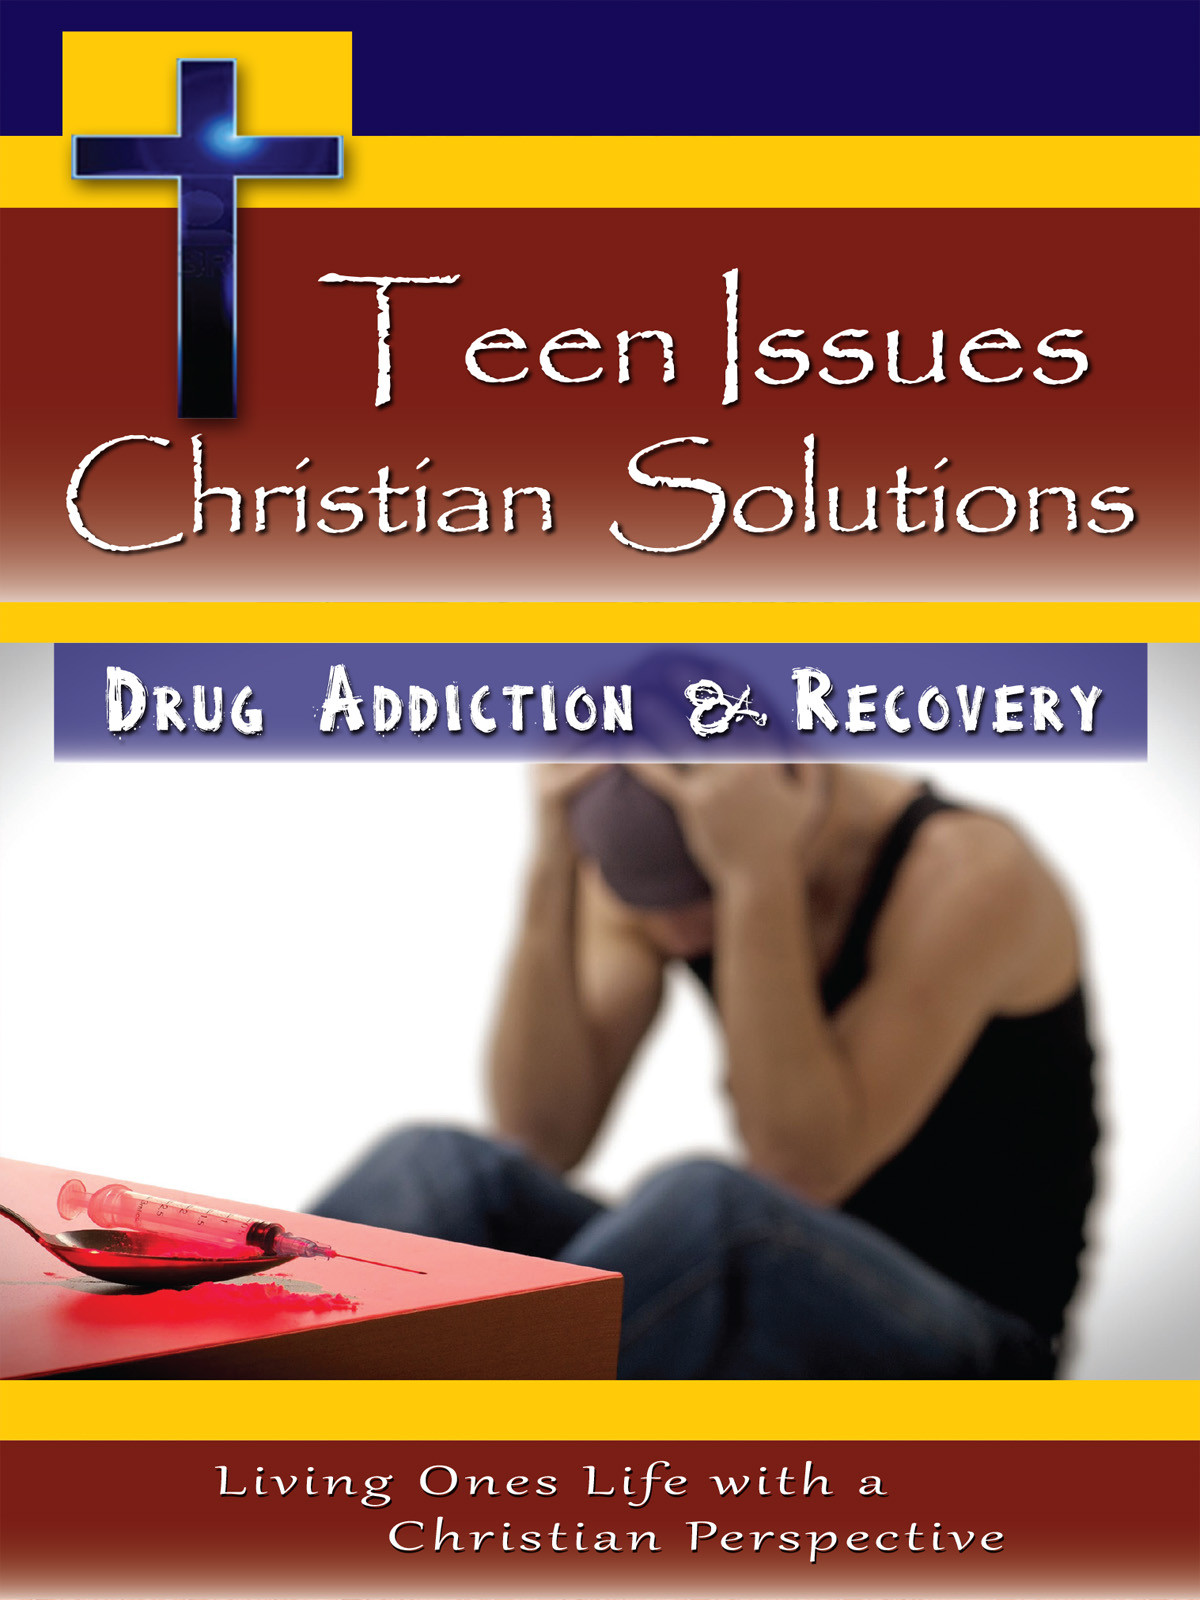 CH9991 - Drug Addiction & Recovery